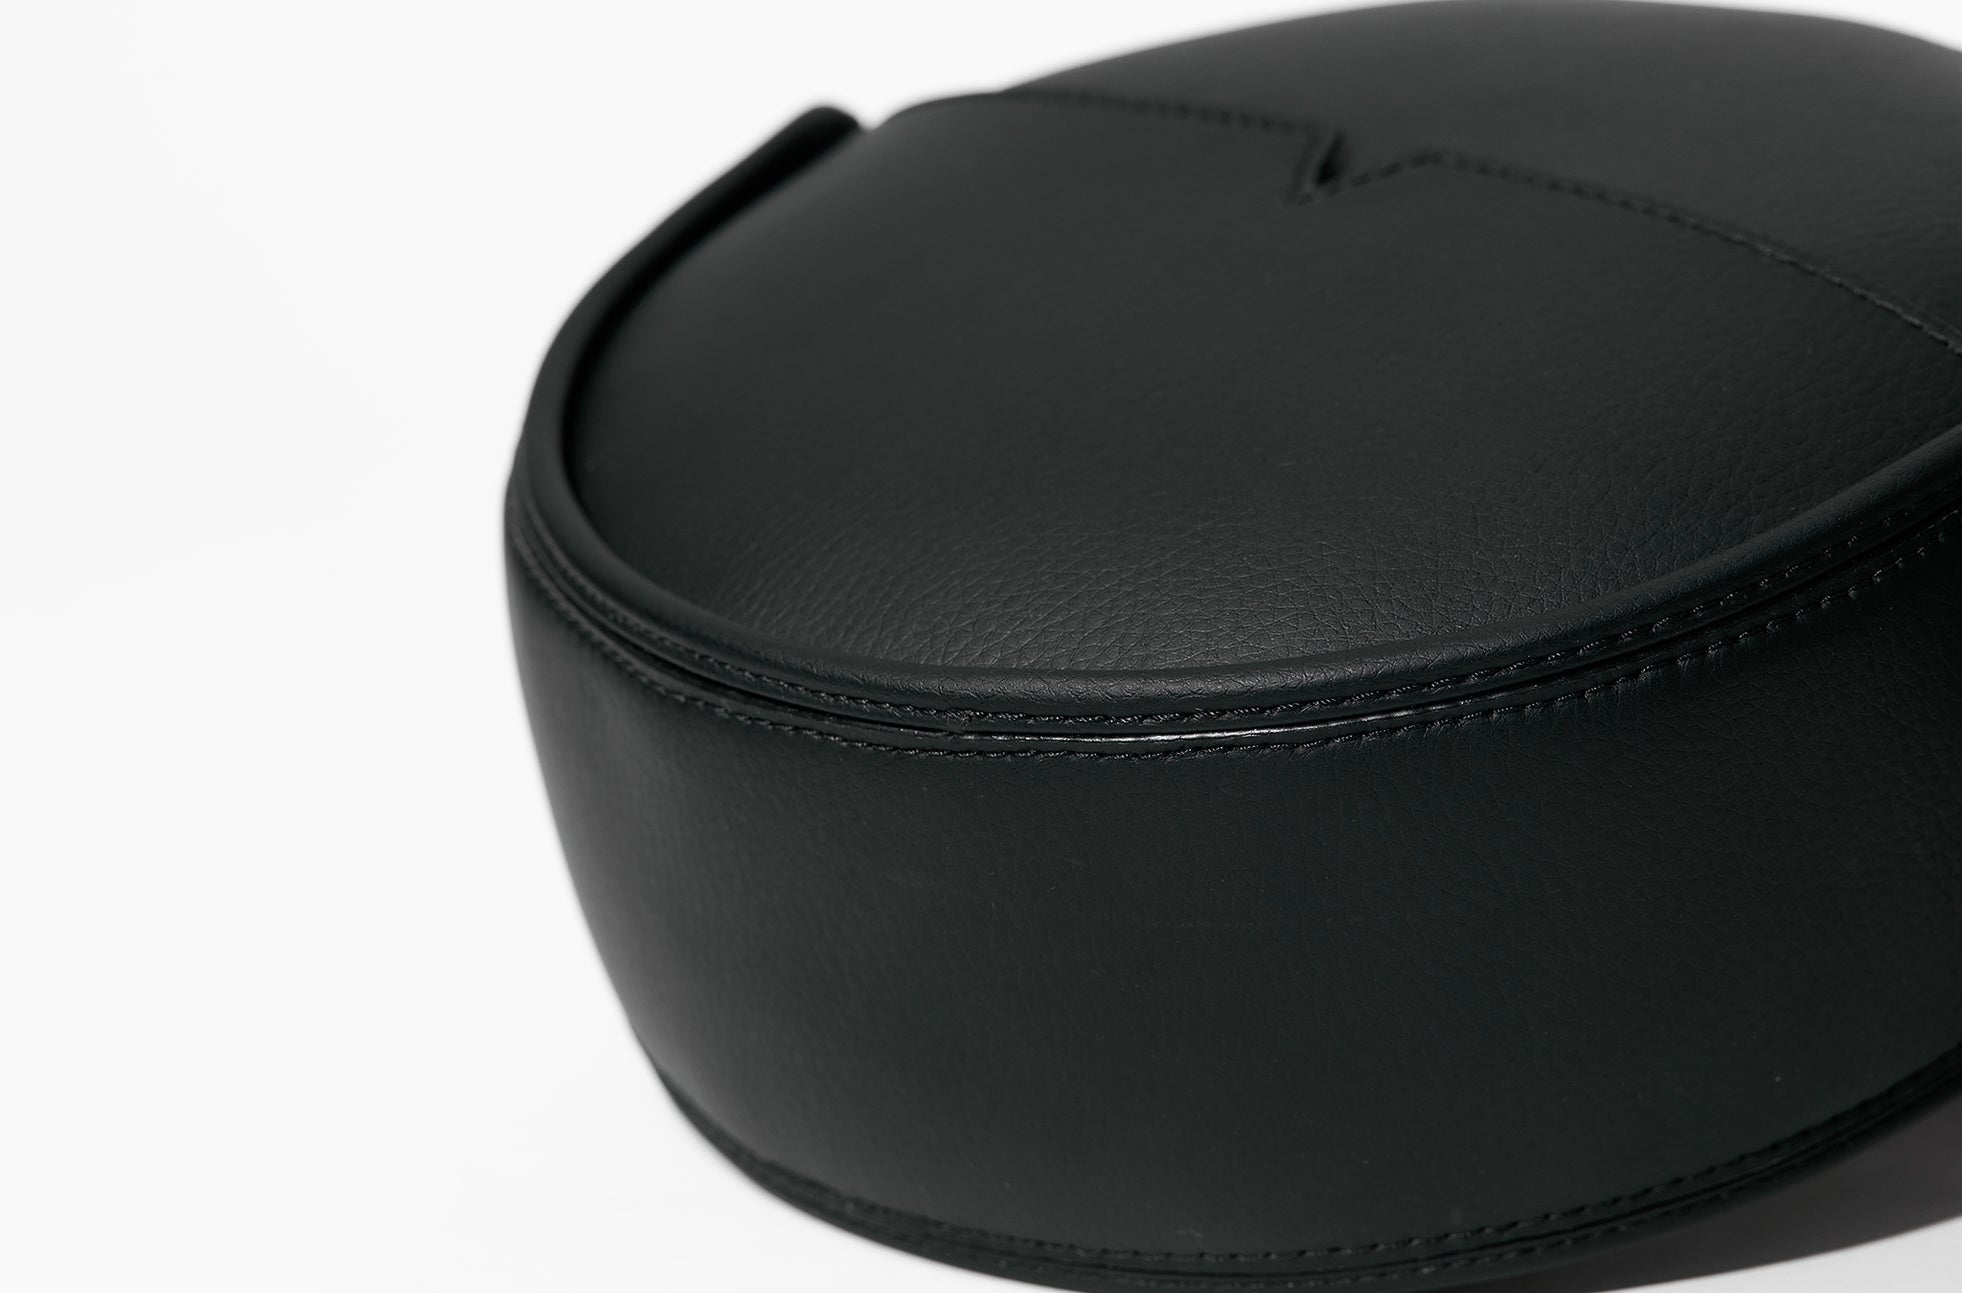 The Circle Crossbody in Banbū Leather in Black image 6